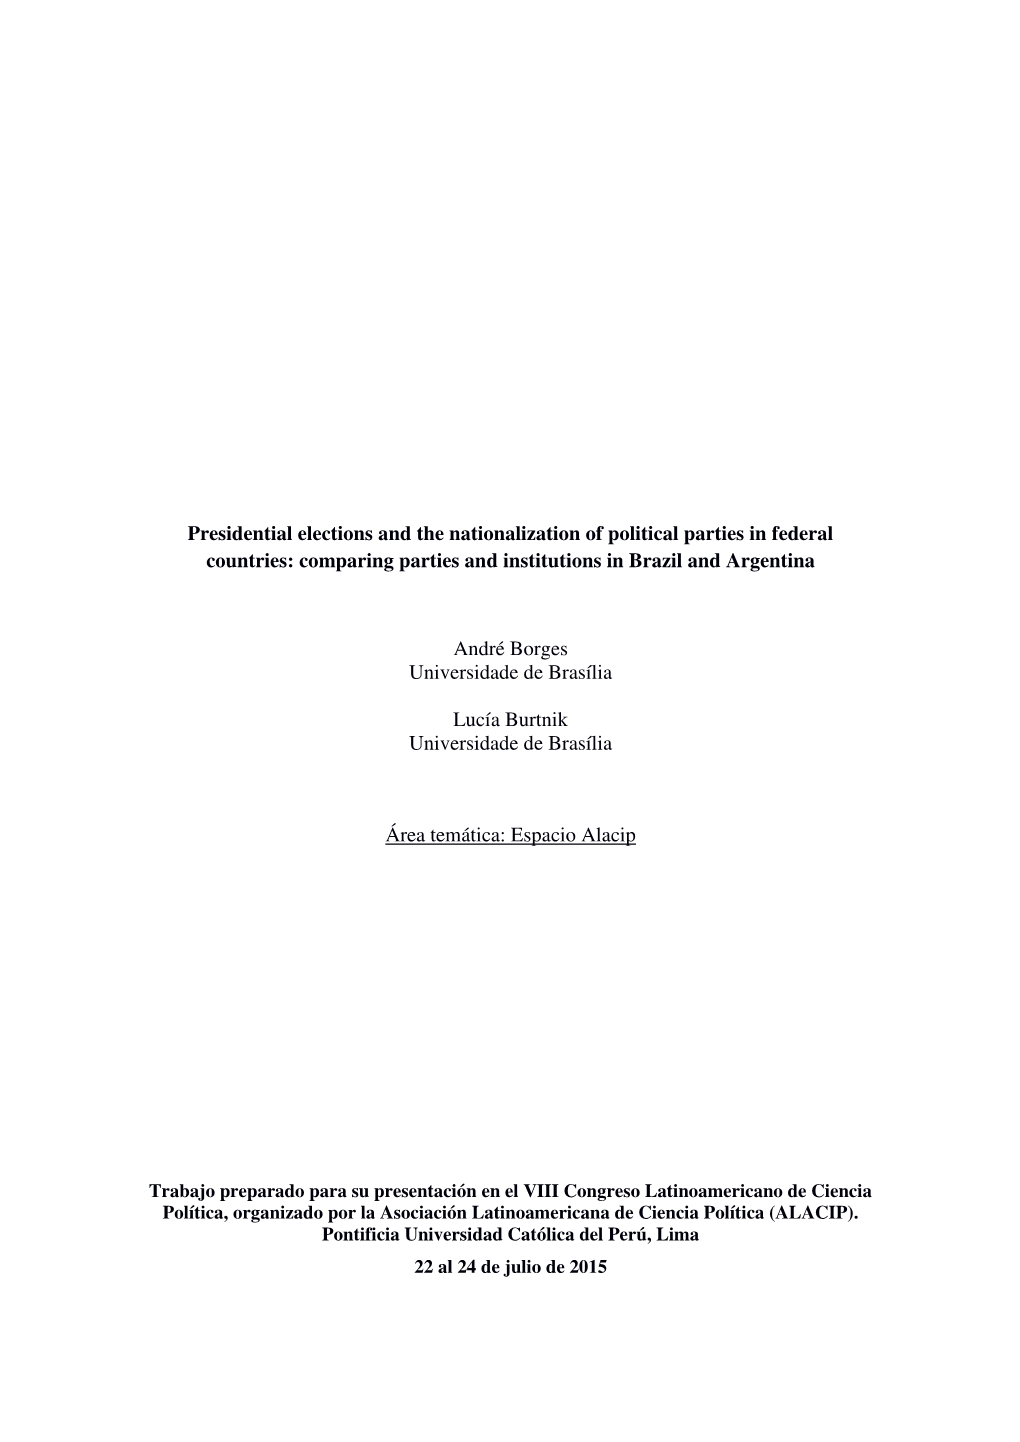 Presidential Elections and the Nationalization of Political Parties in Federal Countries: Comparing Parties and Institutions in Brazil and Argentina